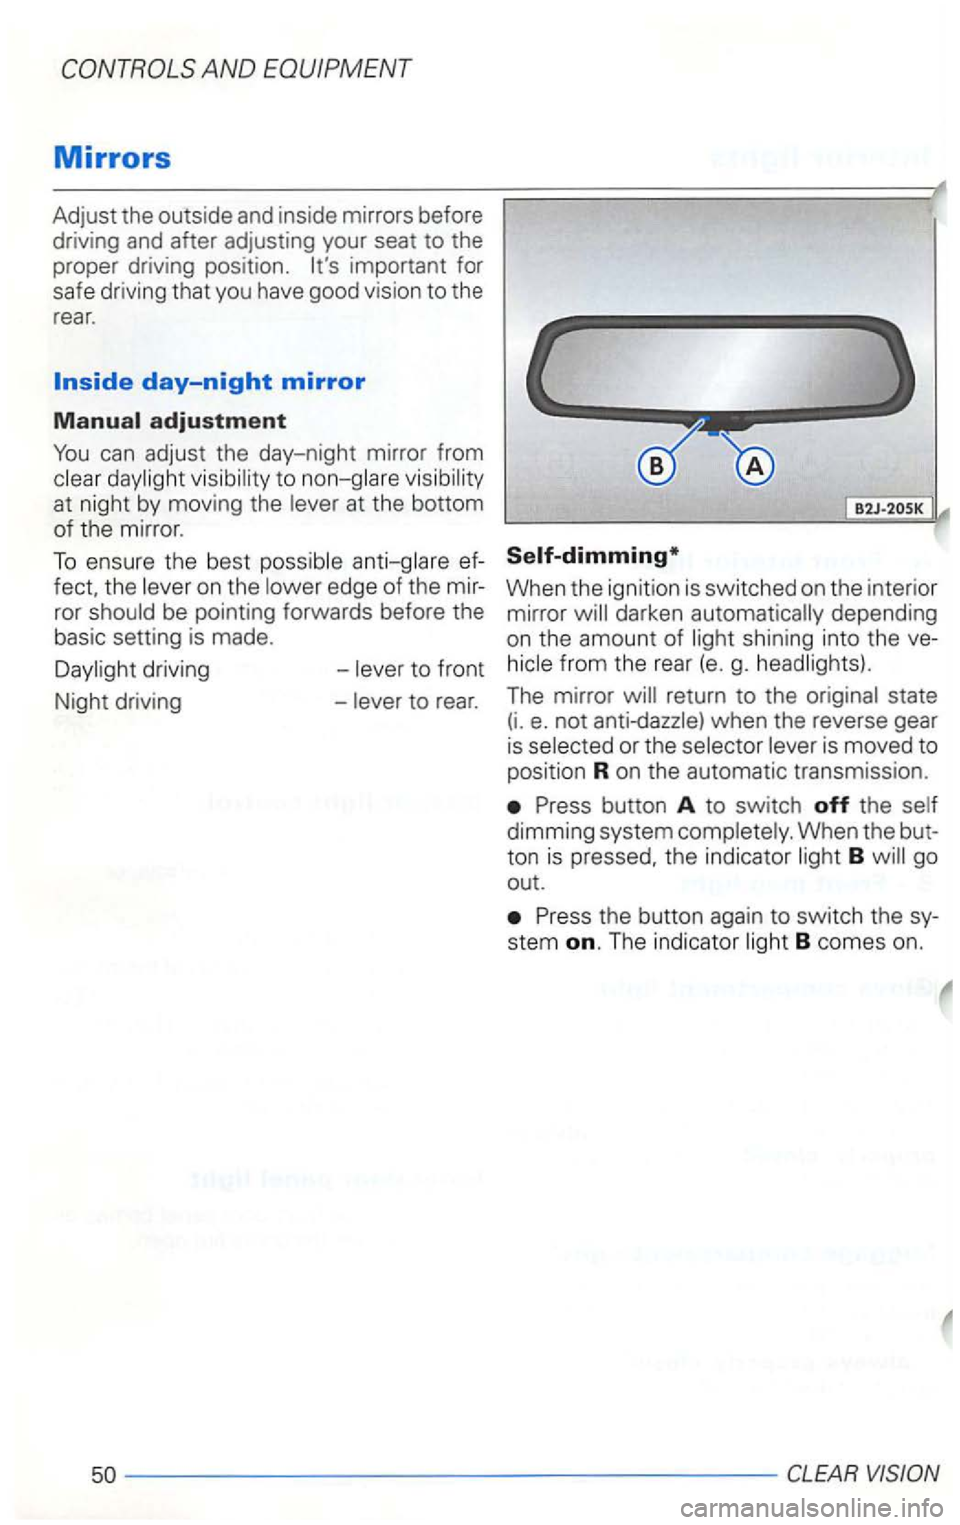 VOLKSWAGEN GOLF 2002  Owners Manual can adjust the day-night  mirror from 
at  night  by mov ing the 
edge  of the  mir­
ror 
be  pointing  forwards  before  the 
basic  setting  is made. When  the ignition  is switched  on the  interi